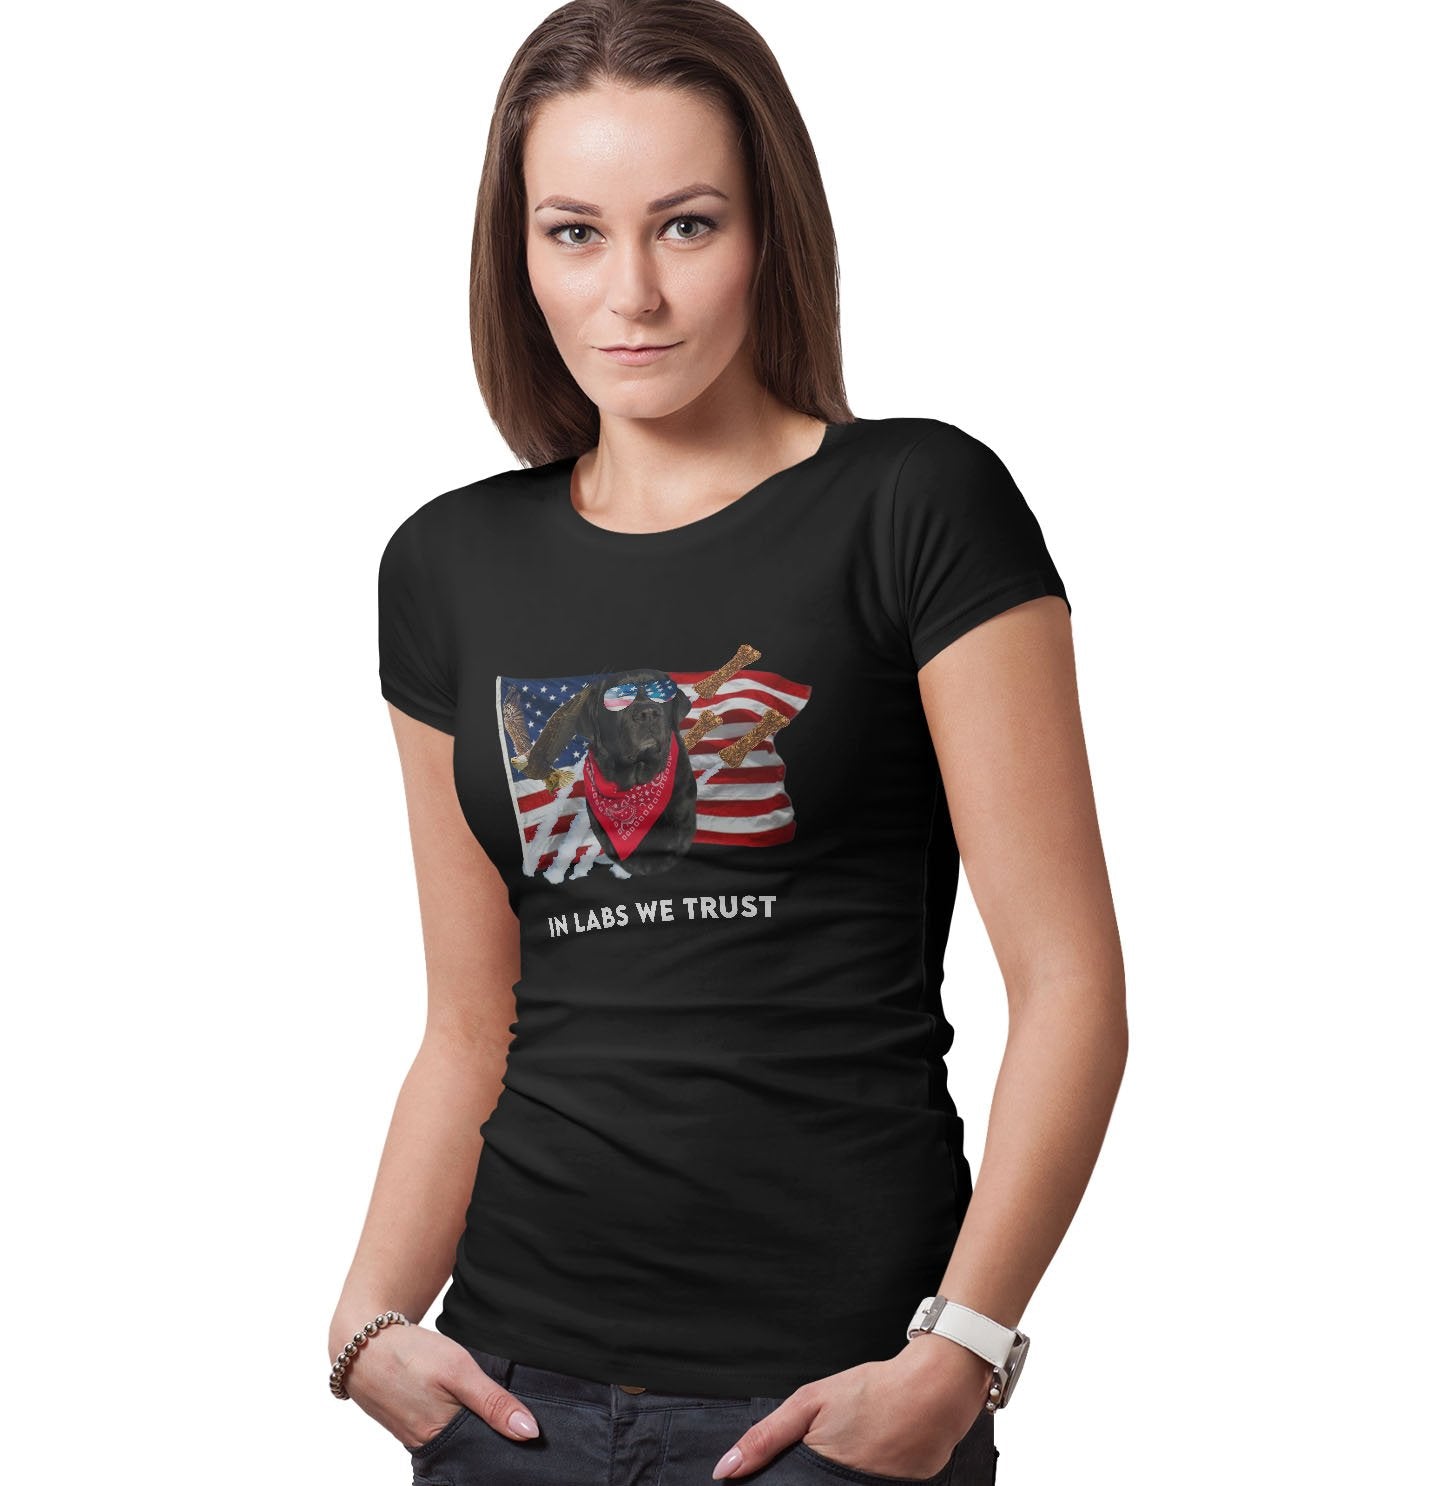 In Lab we Trust Black - Women's Fitted T-Shirt